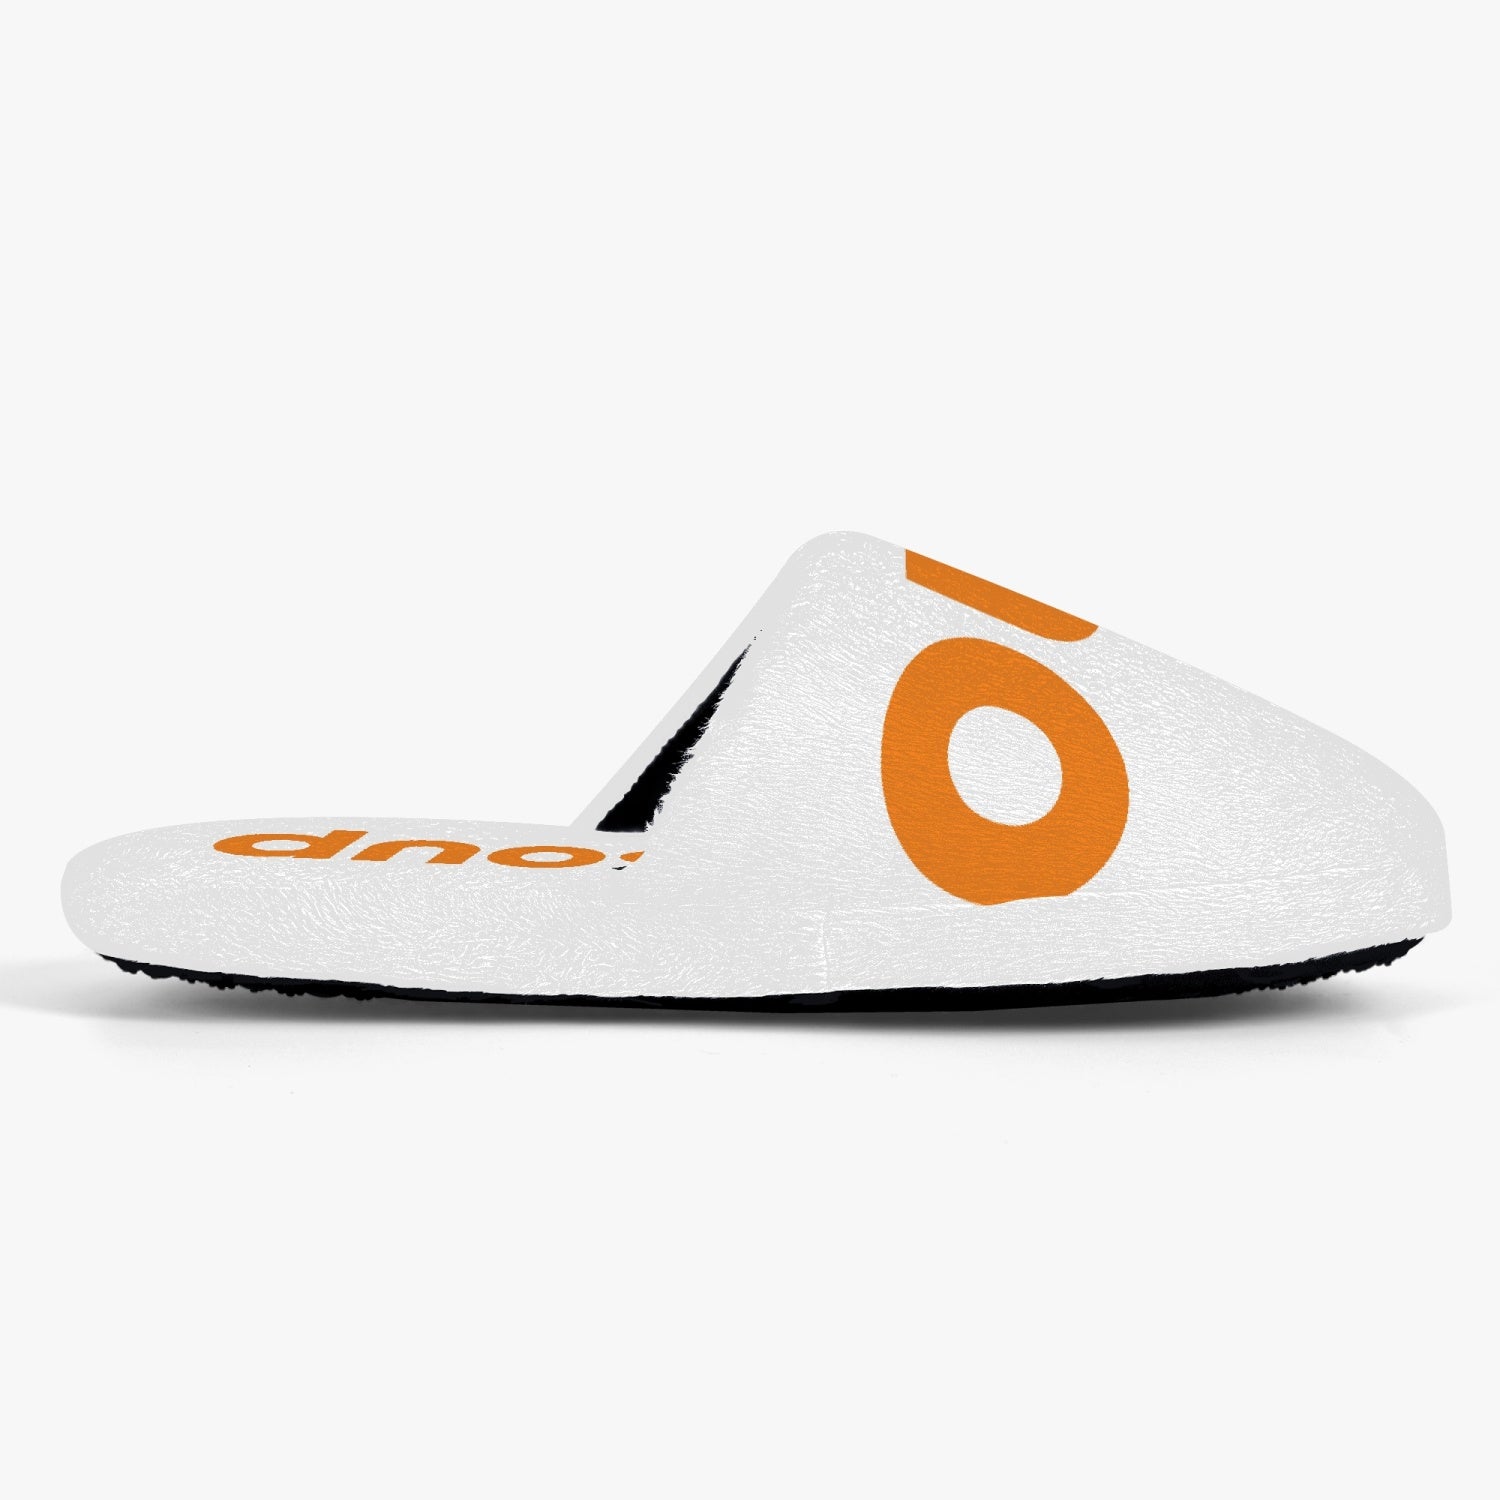 TechSoup Classic Cotton Slippers (FREE SHIPPING)